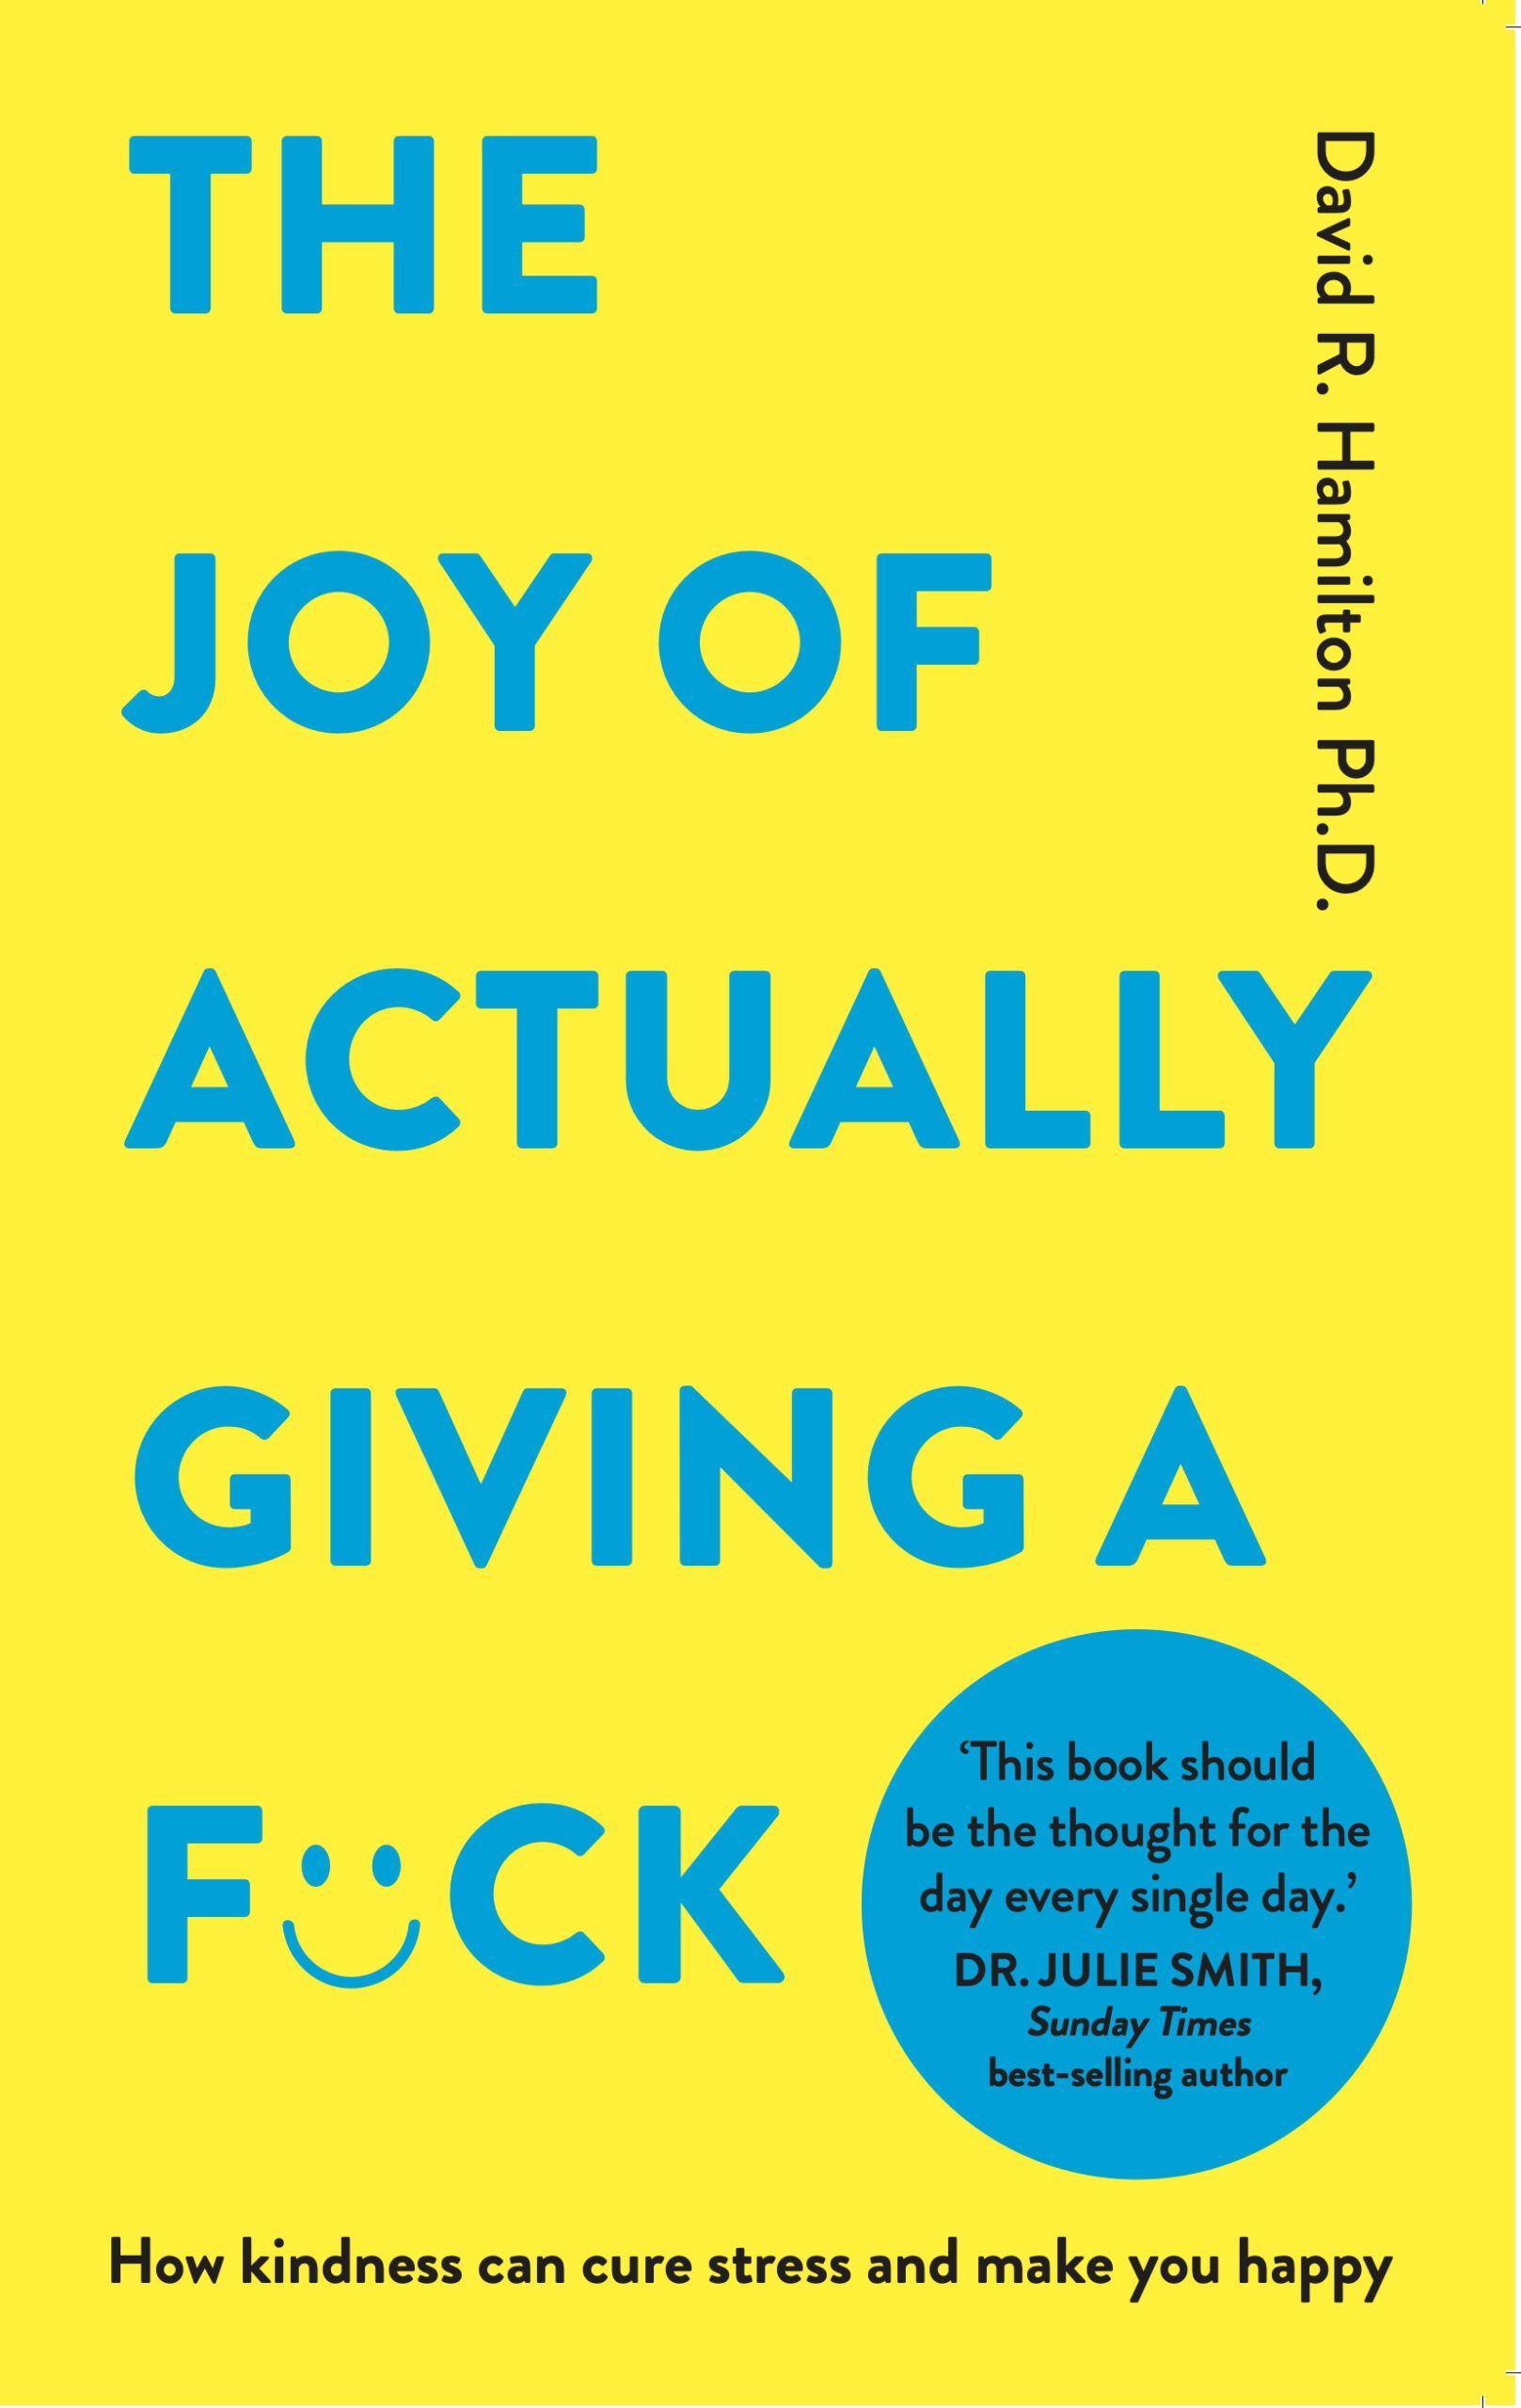 Book cover of The Joy of Actually Giving a Fuck. Large light blue writing on a bright yellow background.